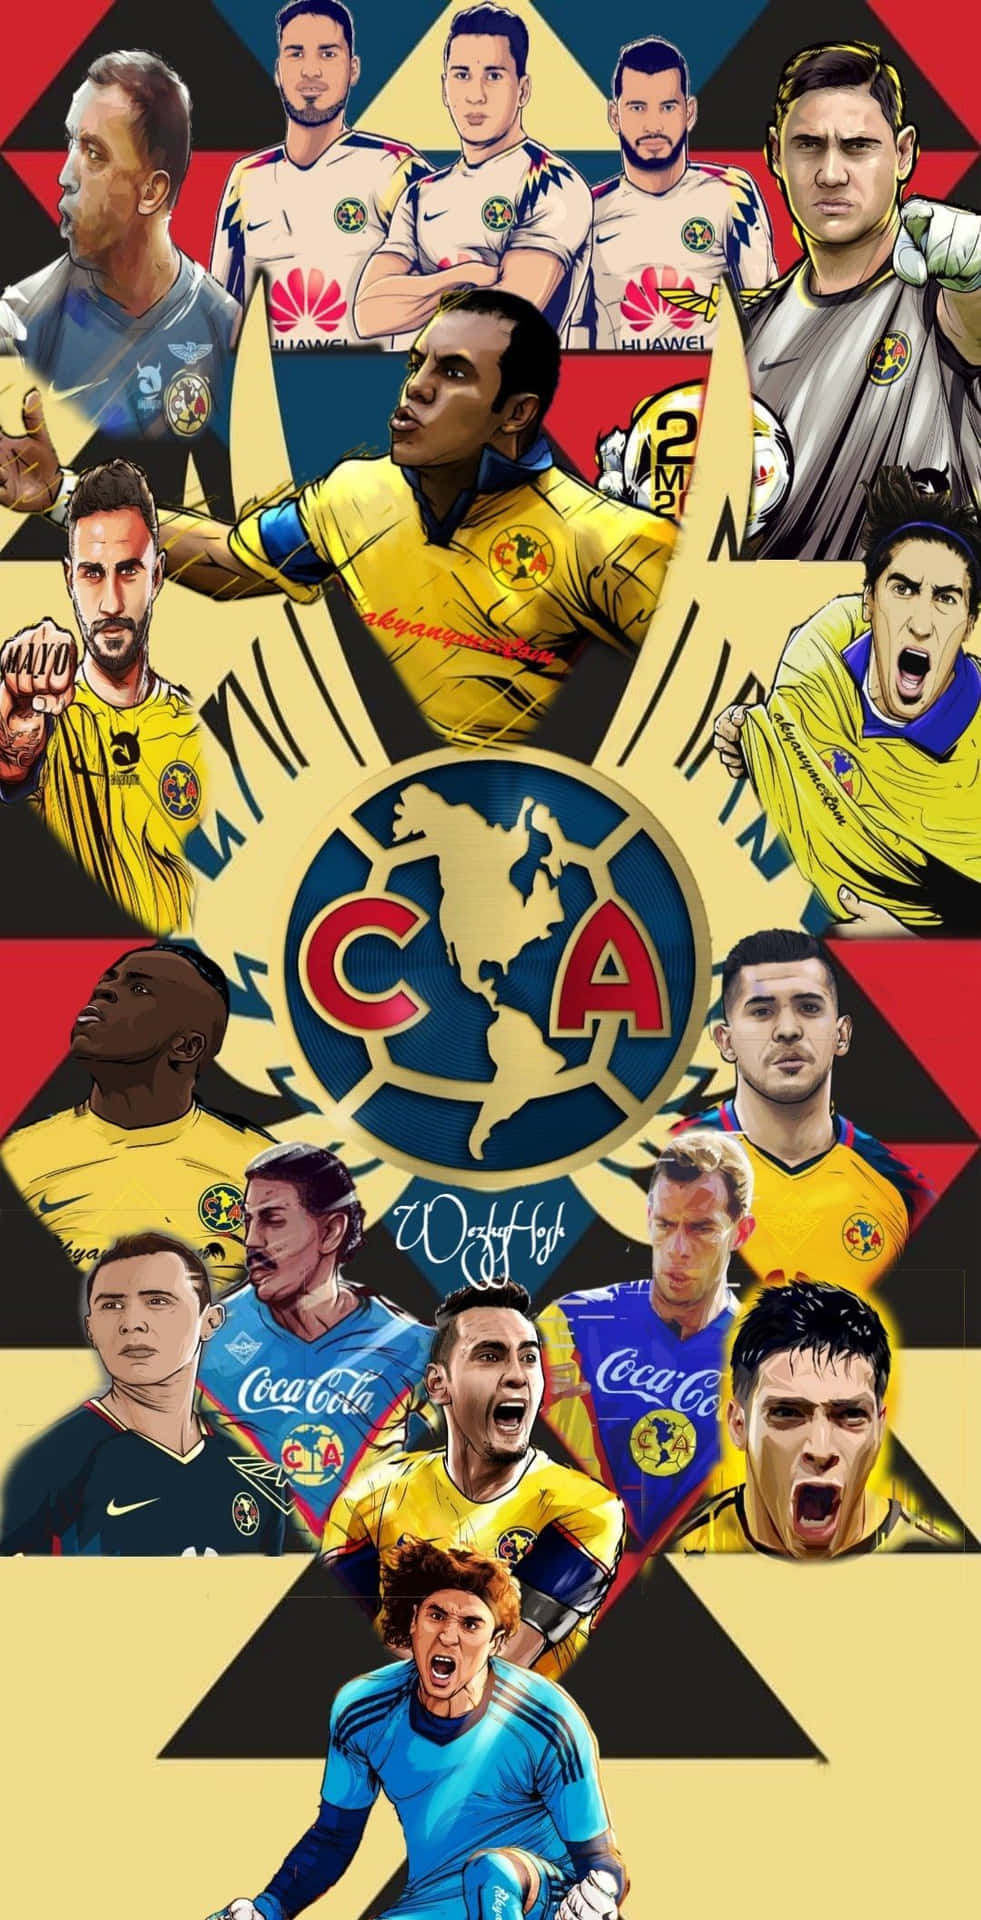 "Ready to Rise Up in support of Club America!" Wallpaper